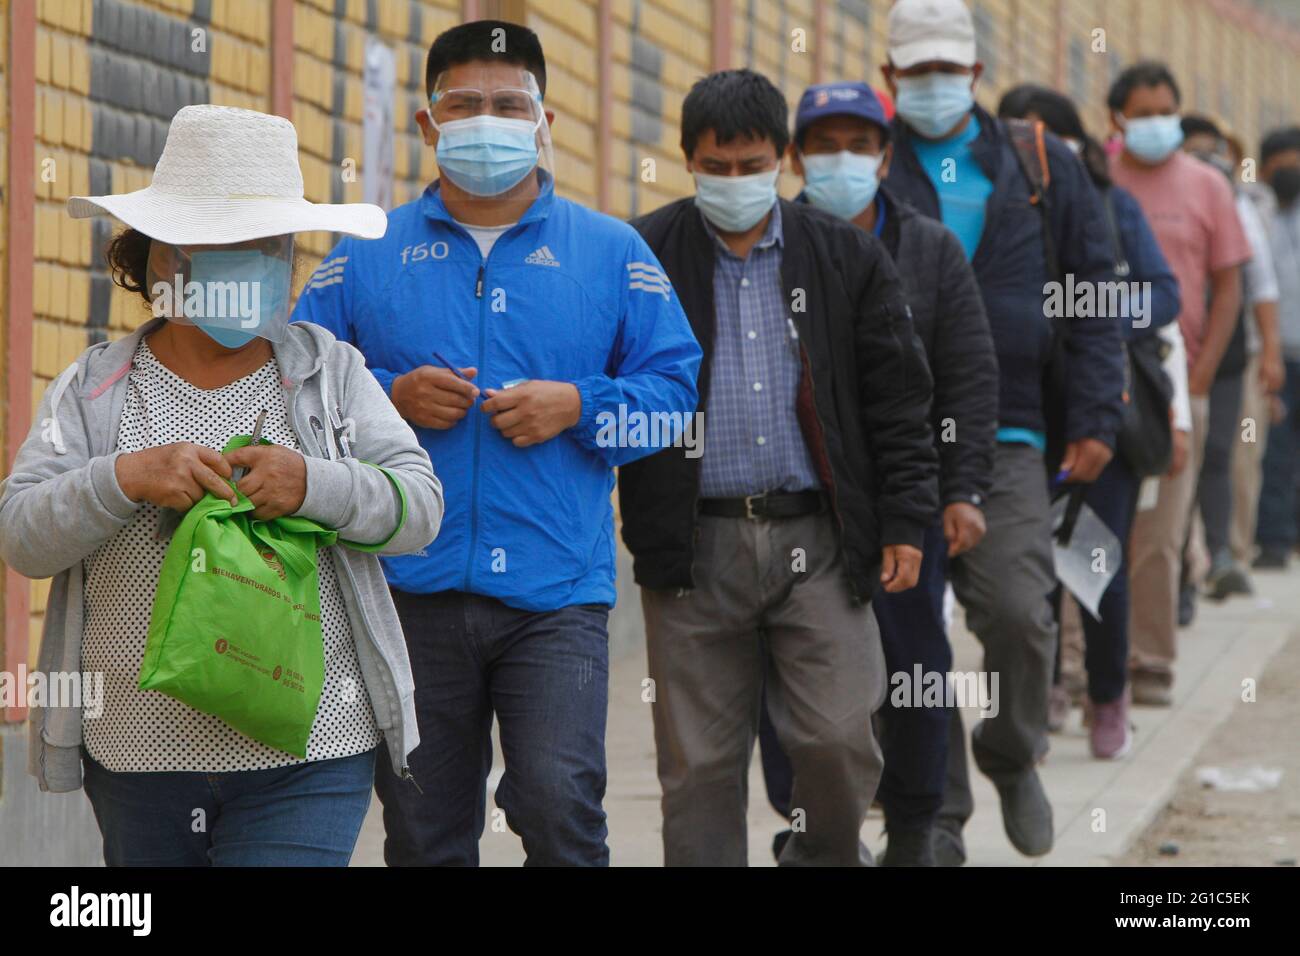 Lima. Peru. 6th June 2021. Presidential Elections. People lining up to cast their vote outside a public school where the voting took place. The school is located in the district of 'Manchay', one of the poorest communities on the outskirts of Lima. Stock Photo